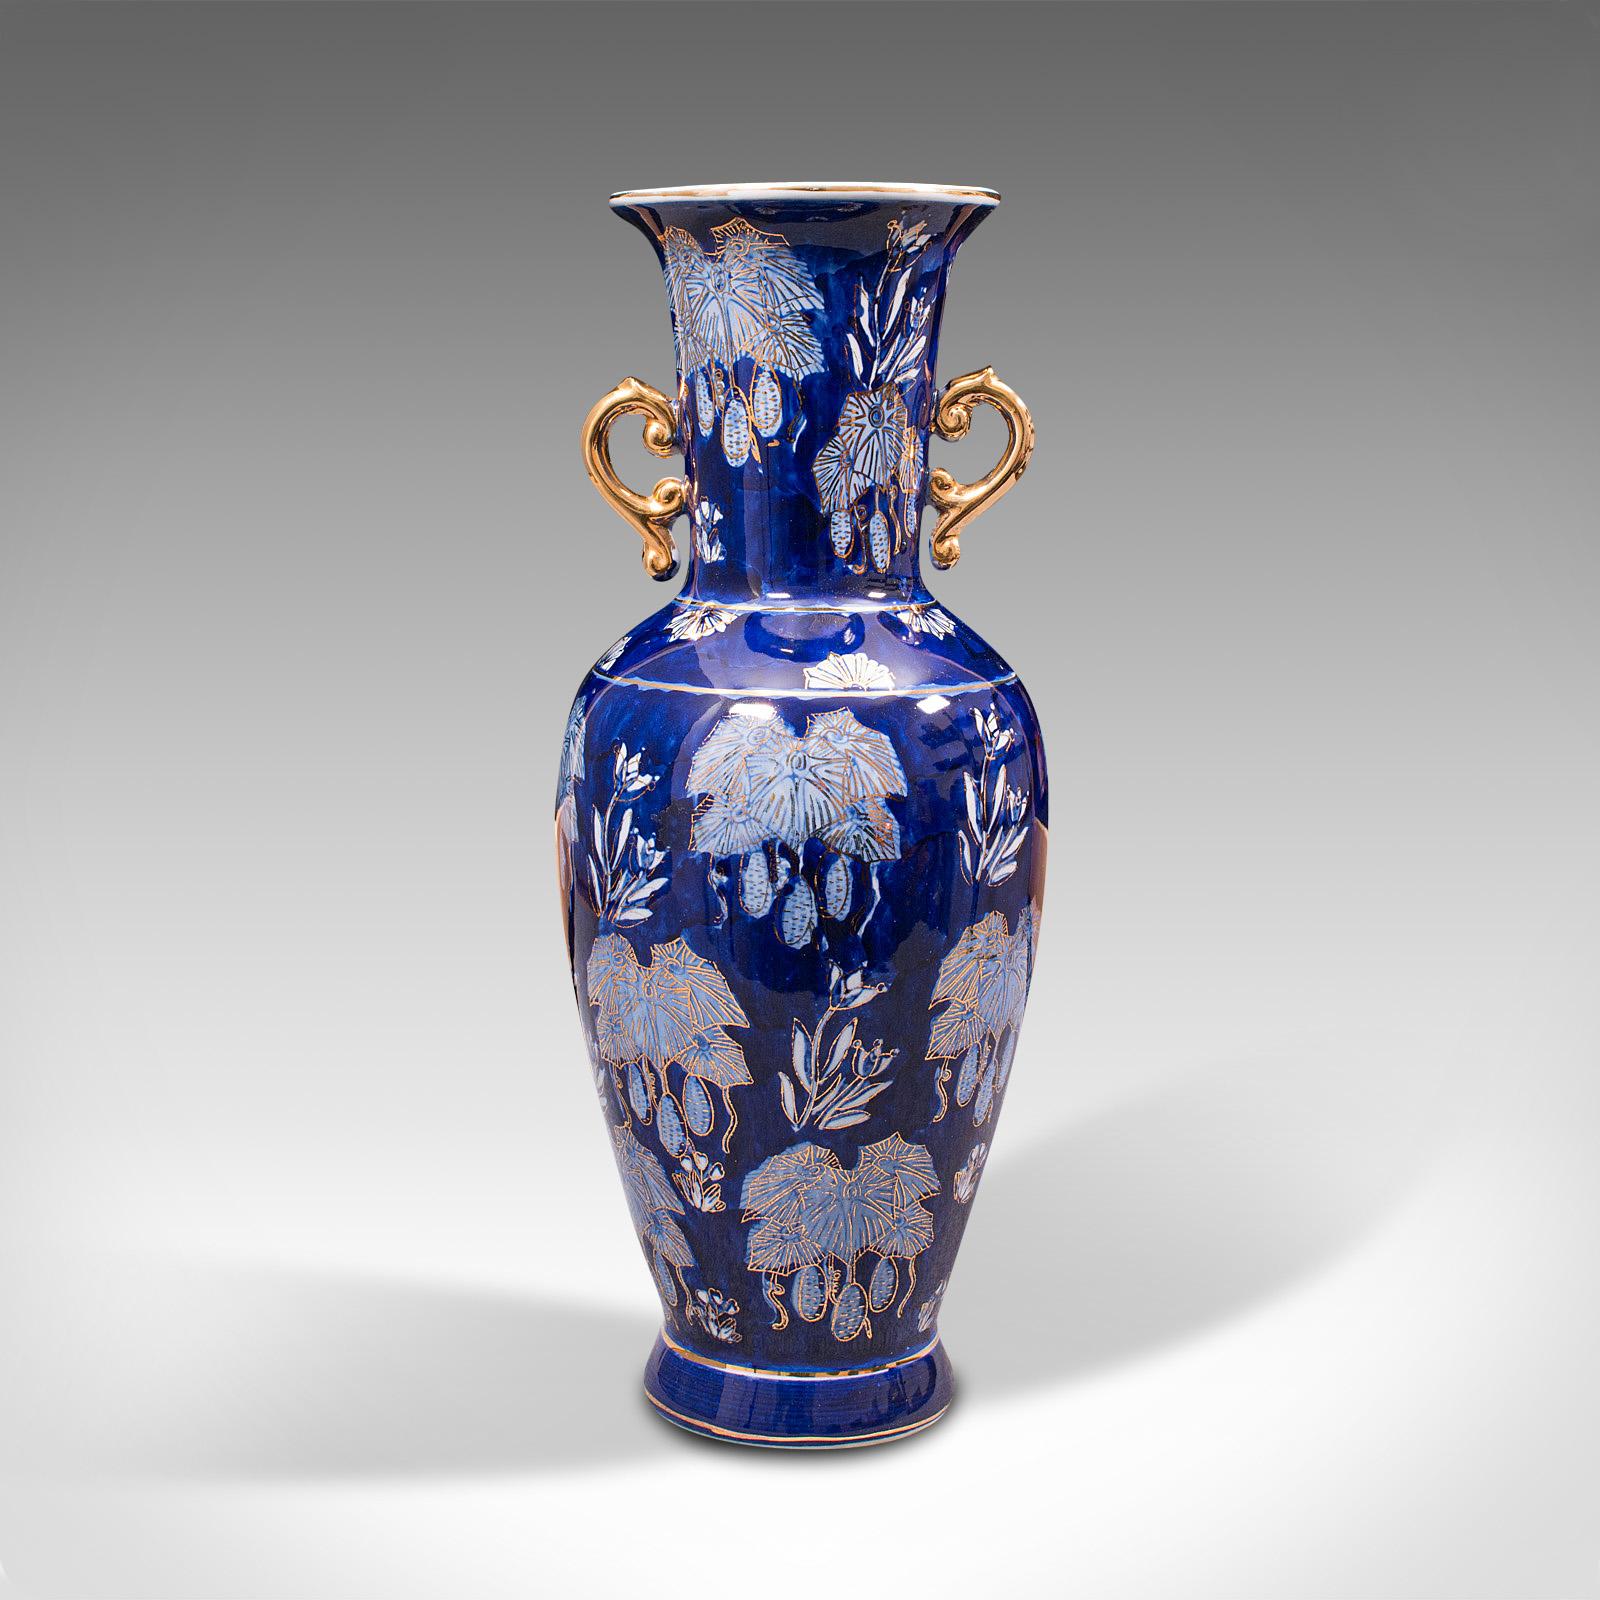 This is a vintage decorative flower vase. An Oriental, ceramic ornamental baluster urn, dating to the late 20th century, circa 1980.

Rich cobalt colour with eye-catching decoration
Displaying a desirable aged patina and free of marks or